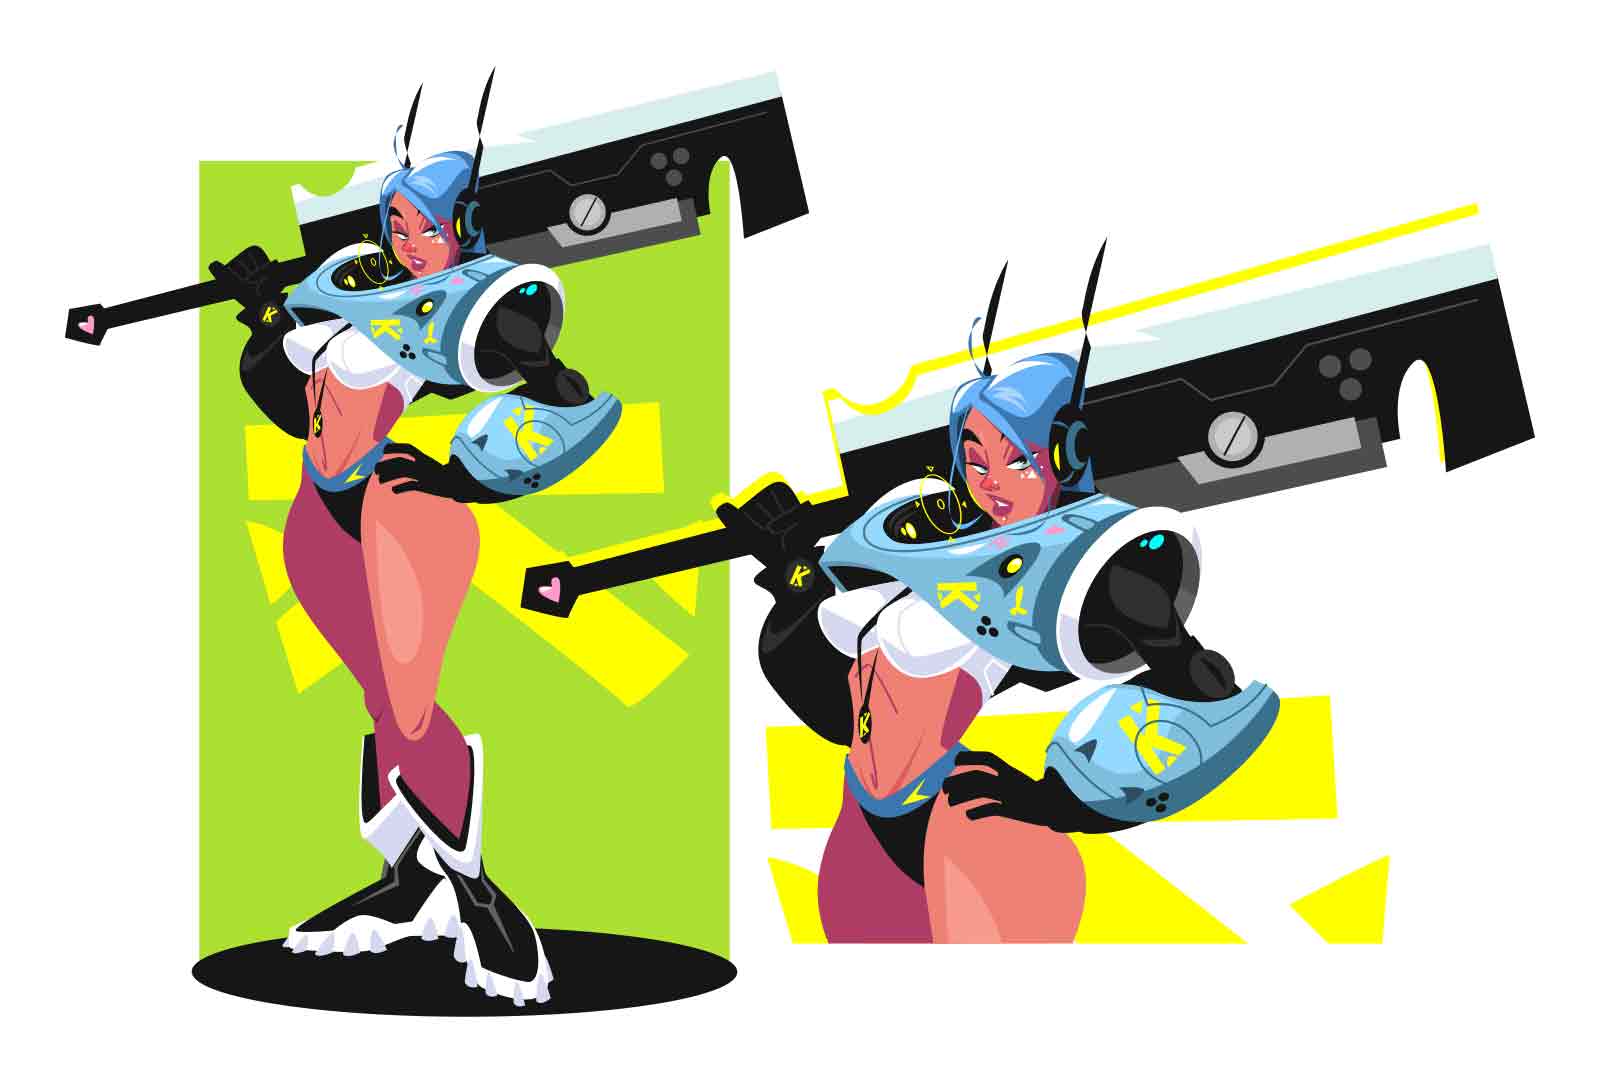 Futuristic female warrior, vector illustration. Woman with a gun and a helmet in a green and yellow background.